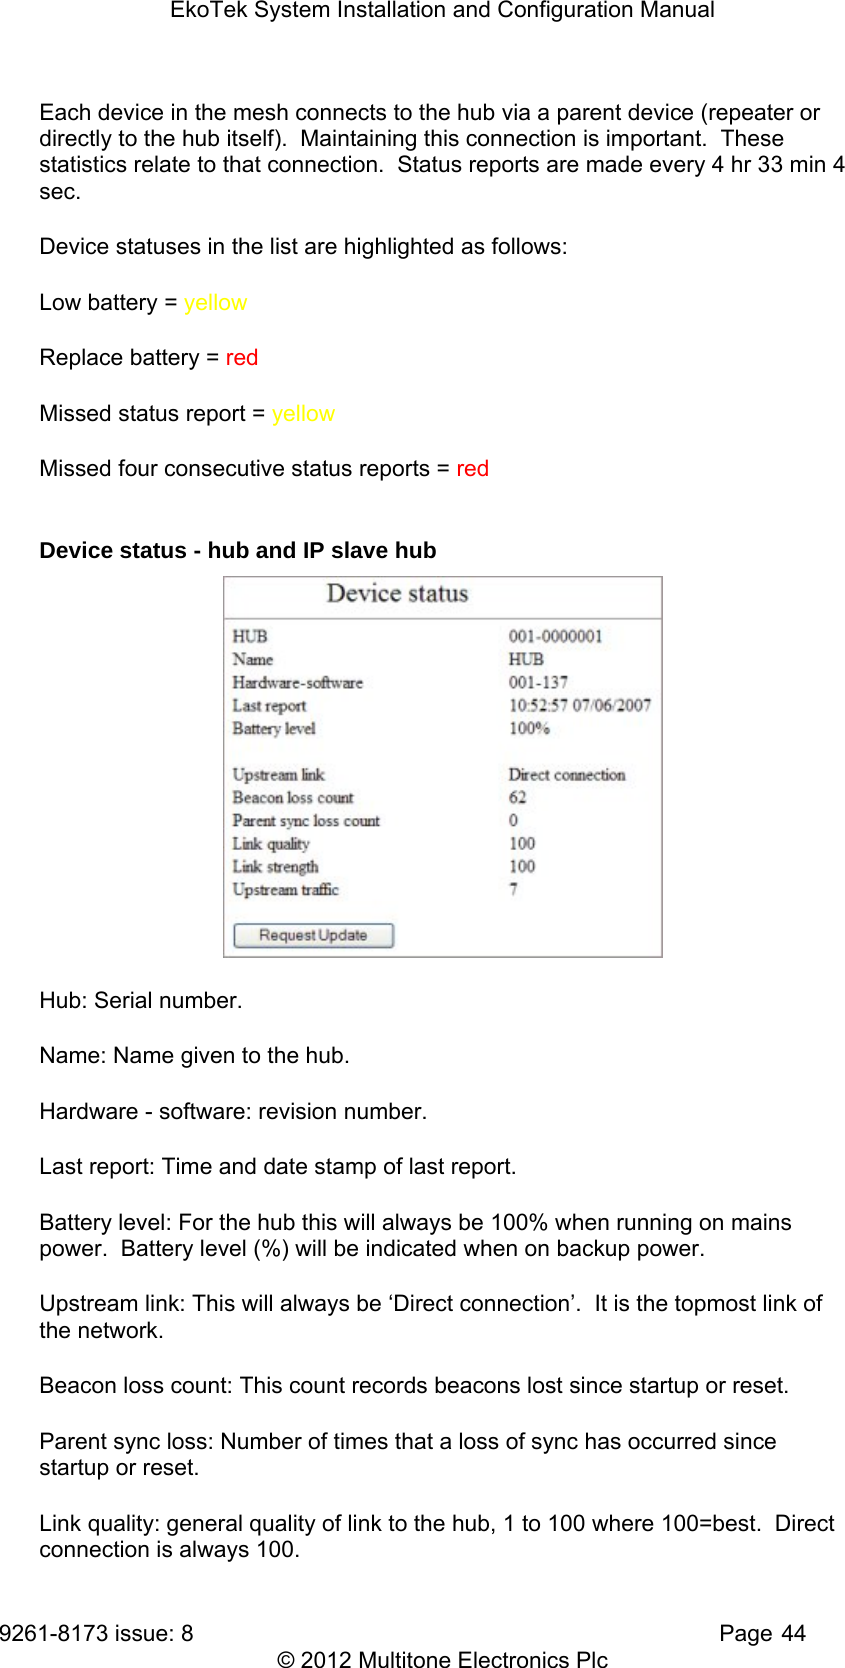 EkoTek System Installation and Configuration Manual 9261-8173 issue: 8   Page 44 © 2012 Multitone Electronics Plc Each device in the mesh connects to the hub via a parent device (repeater or directly to the hub itself).  Maintaining this connection is important.  These statistics relate to that connection.  Status reports are made every 4 hr 33 min 4 sec. Device statuses in the list are highlighted as follows: Low battery = yellow Replace battery = red Missed status report = yellow Missed four consecutive status reports = red  Device status - hub and IP slave hub  Hub: Serial number. Name: Name given to the hub. Hardware - software: revision number. Last report: Time and date stamp of last report. Battery level: For the hub this will always be 100% when running on mains power.  Battery level (%) will be indicated when on backup power. Upstream link: This will always be ‘Direct connection’.  It is the topmost link of the network. Beacon loss count: This count records beacons lost since startup or reset. Parent sync loss: Number of times that a loss of sync has occurred since startup or reset. Link quality: general quality of link to the hub, 1 to 100 where 100=best.  Direct connection is always 100. 